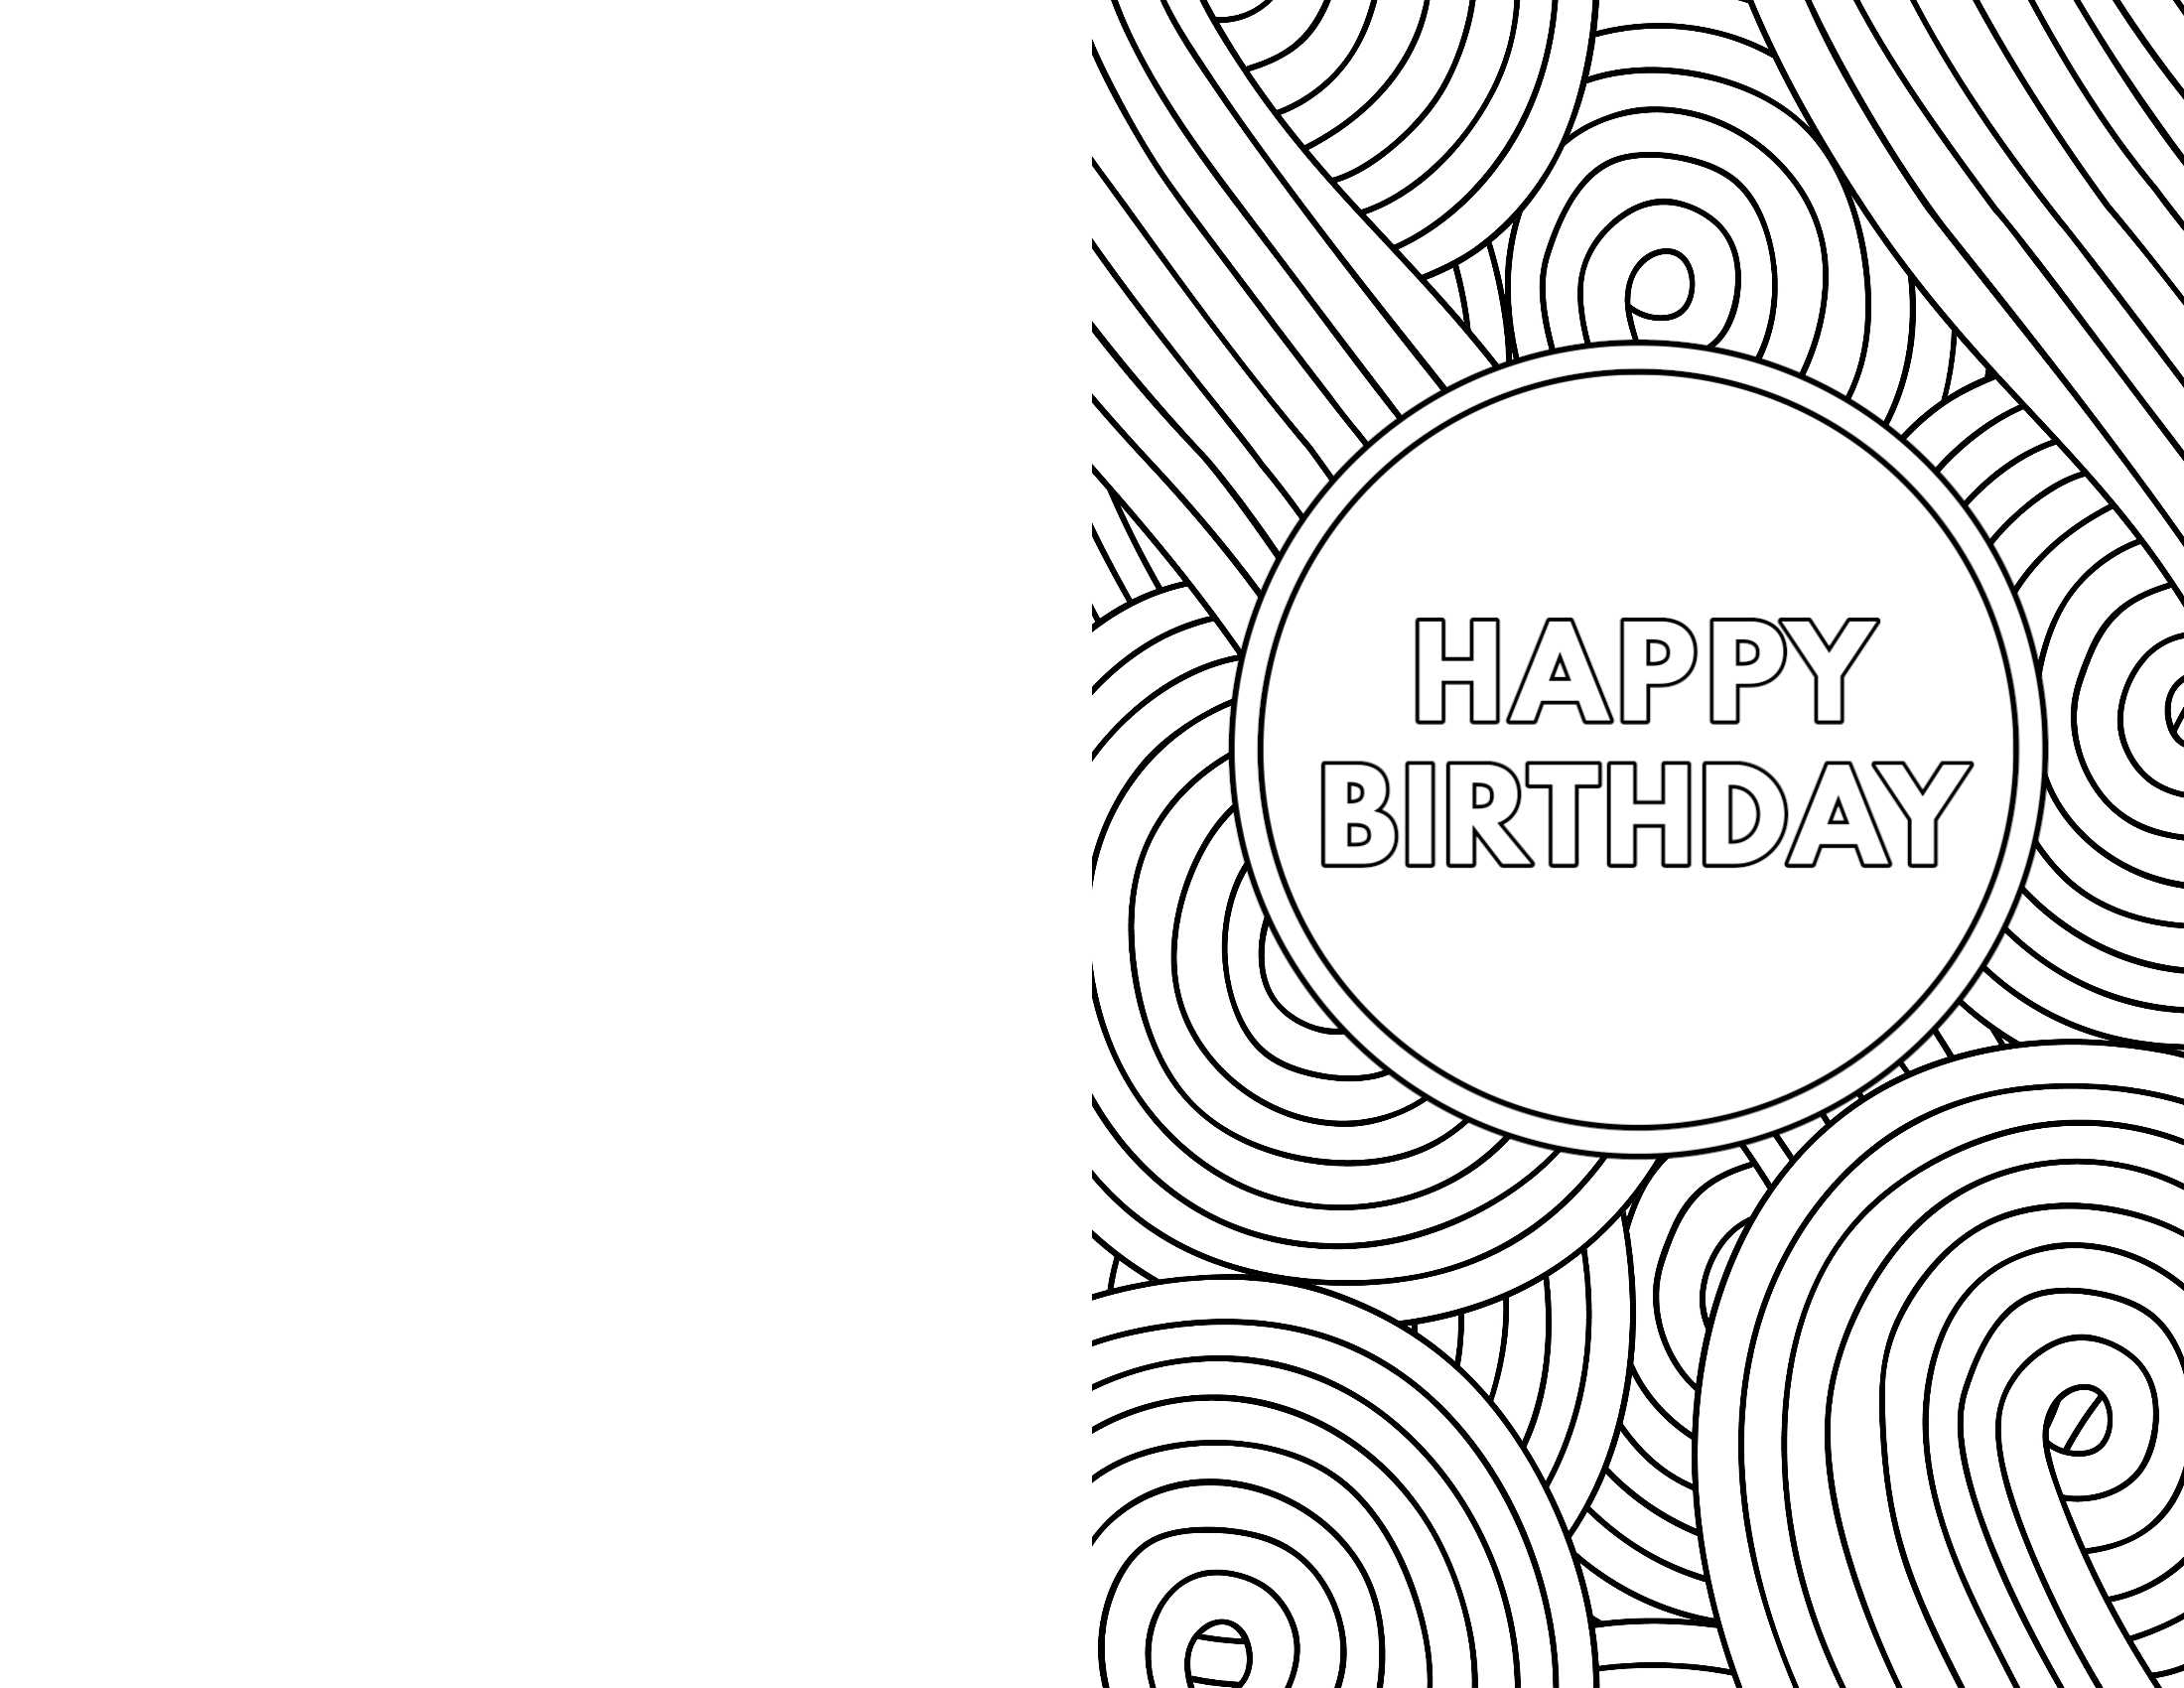 Free Printable Birthday Cards - Paper Trail Design Throughout Foldable Birthday Card Template